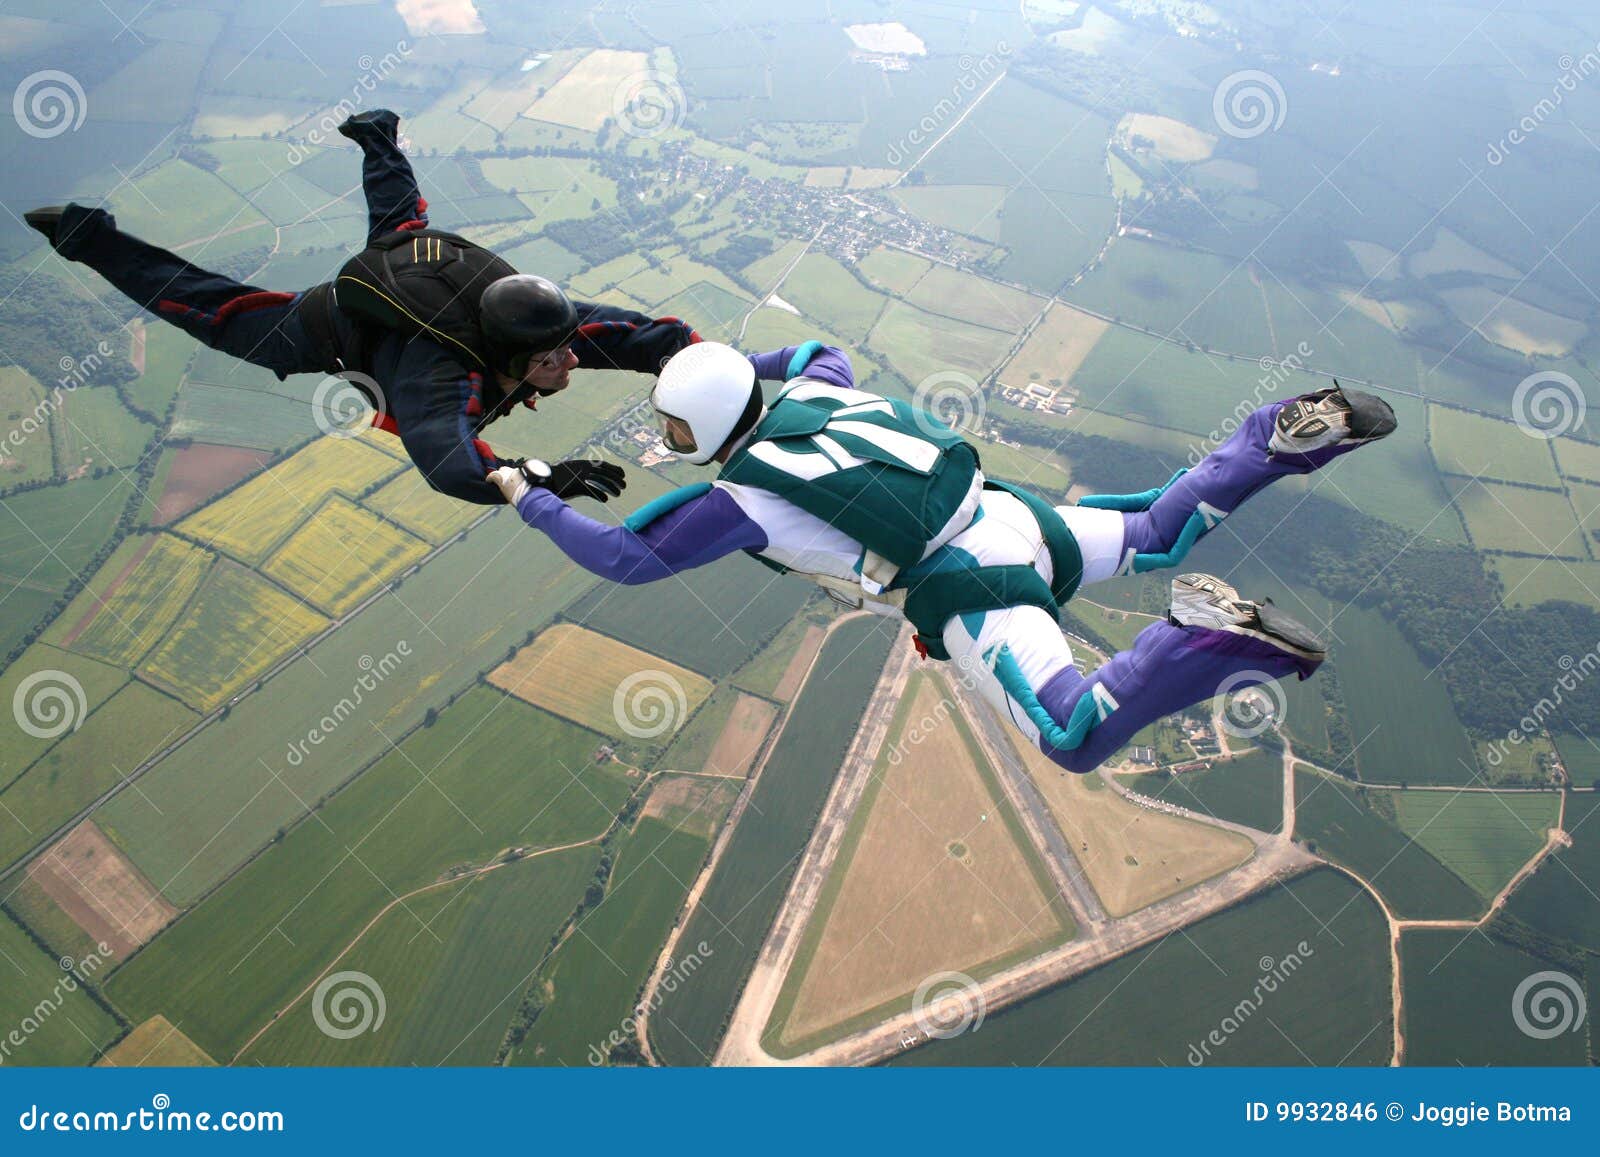 two skydivers in freefall